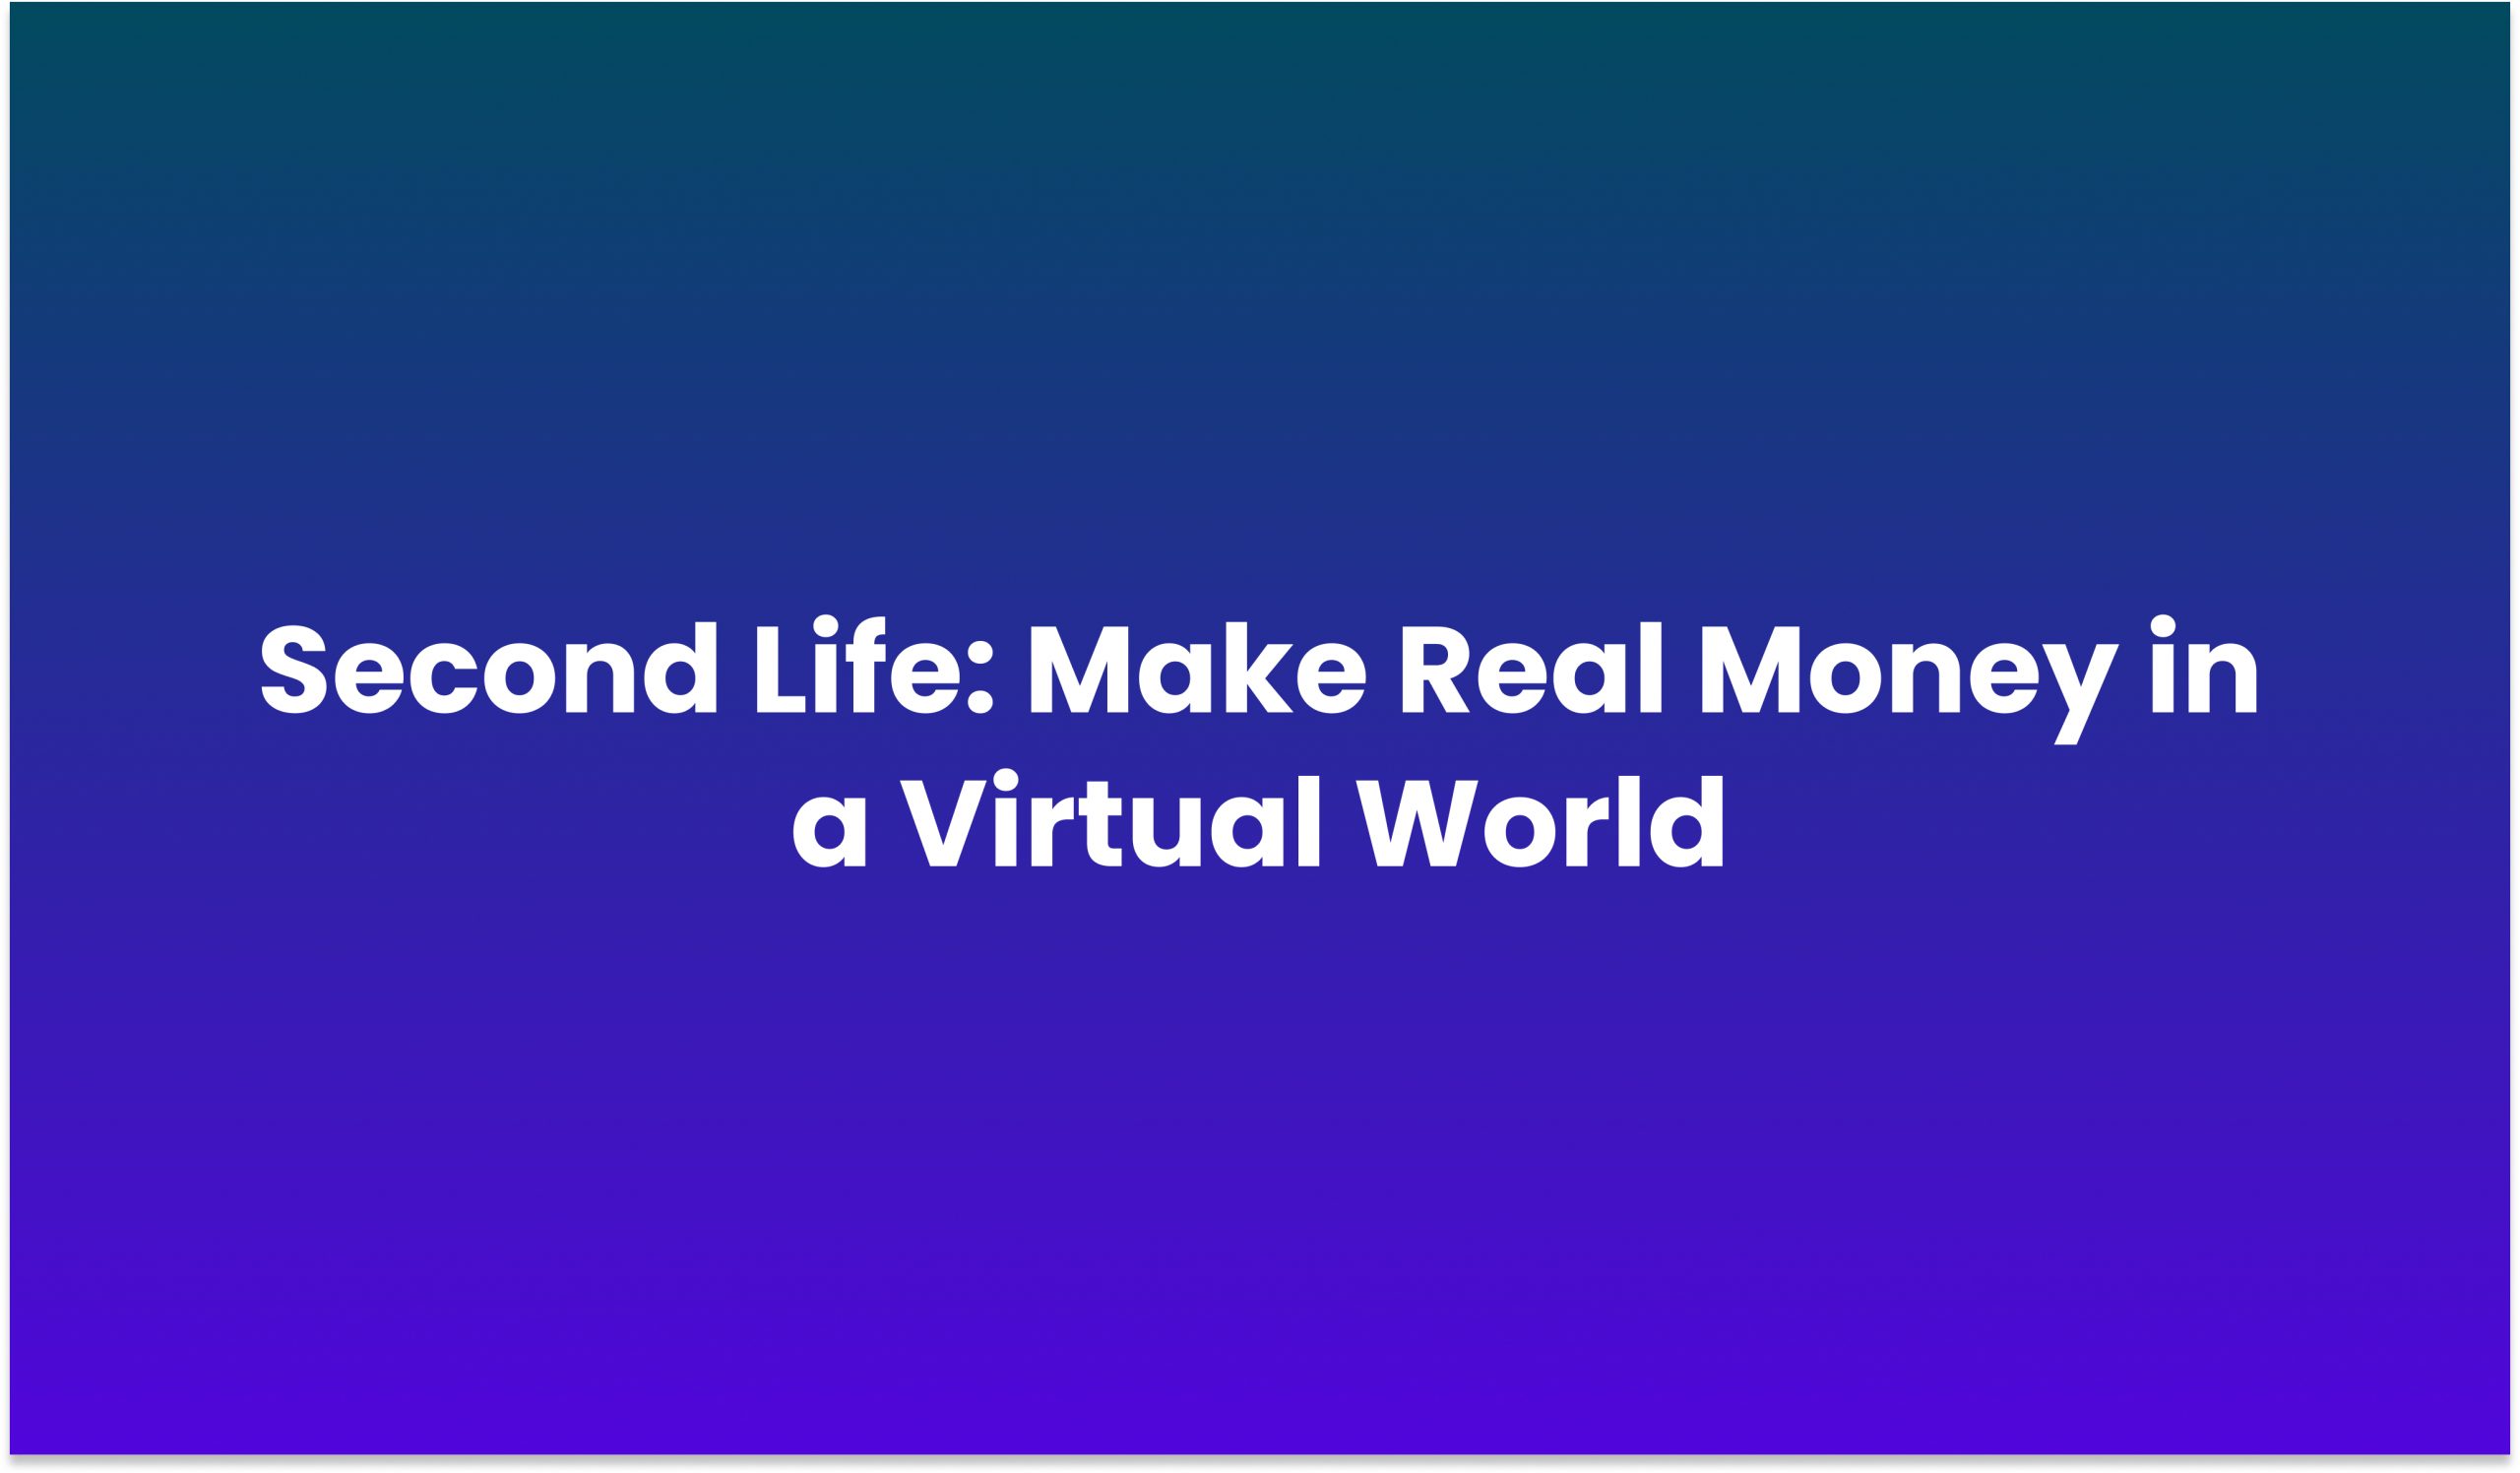 Second Life: Make Real Money in a Virtual World